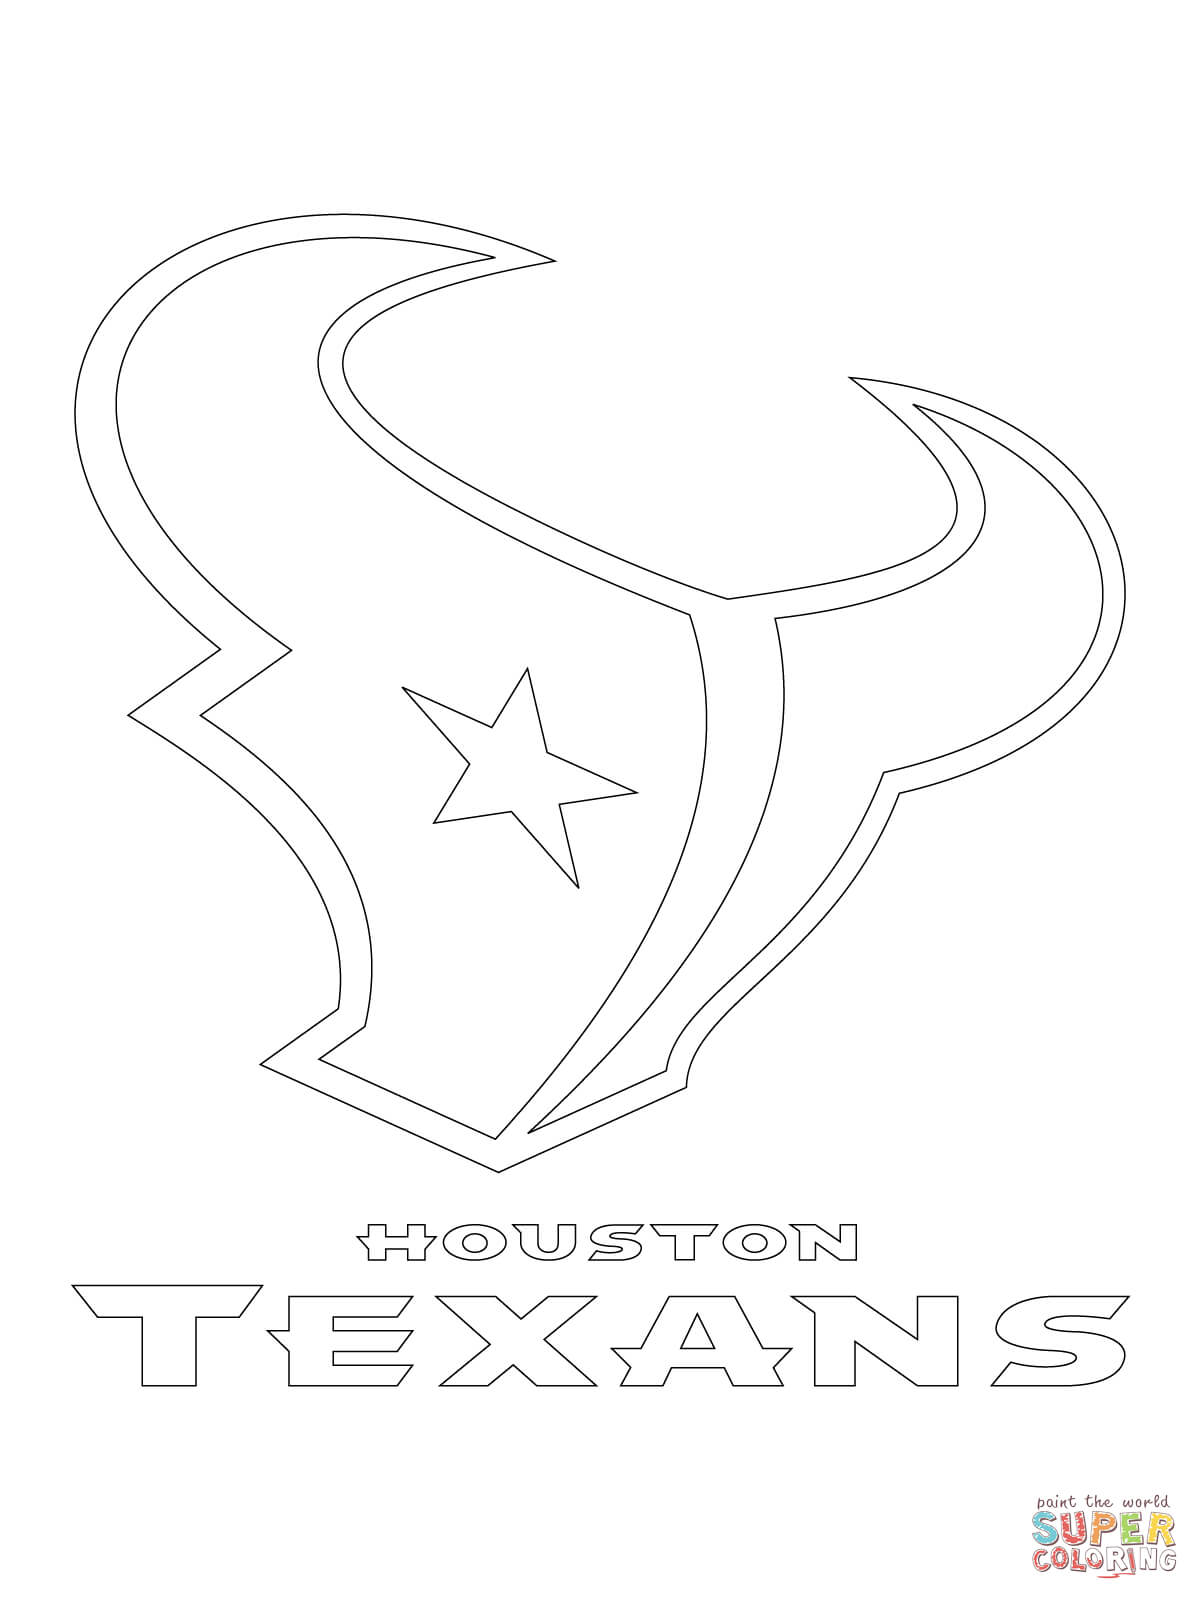 Houston Texans Logo coloring page | Free Printable Coloring Pages